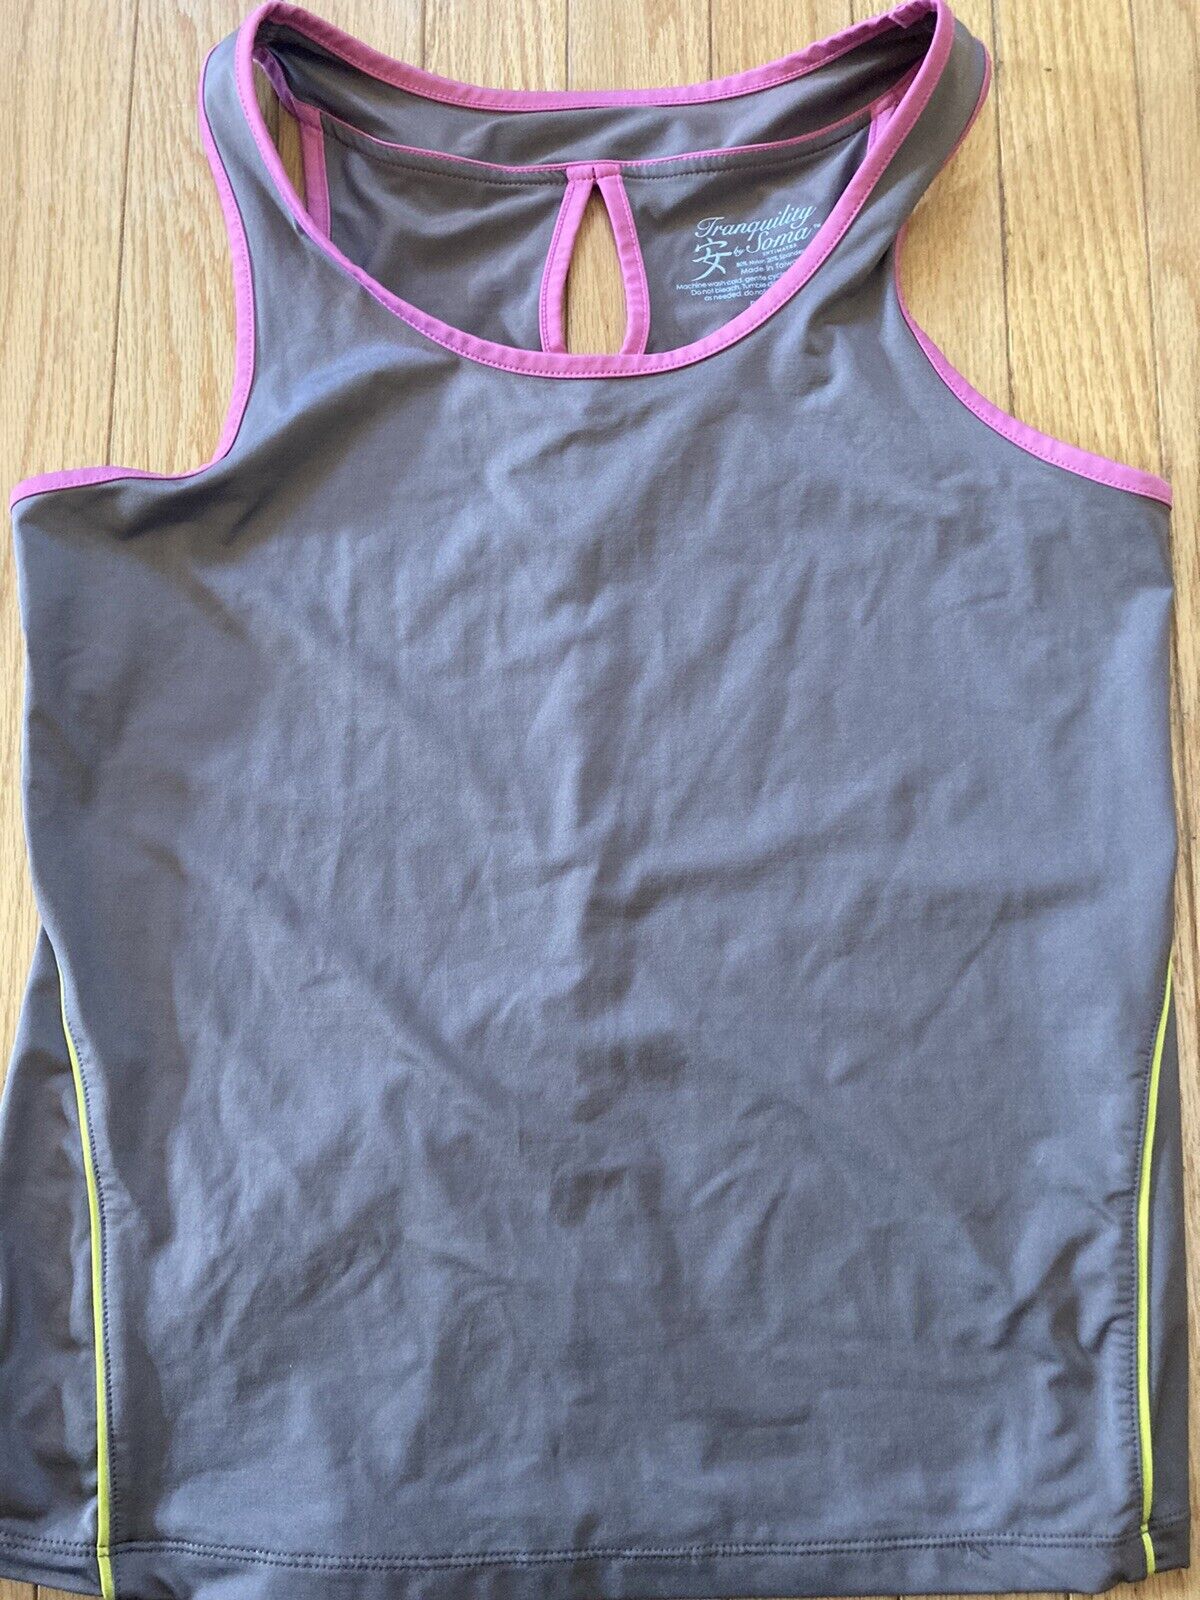 Soma Tranquility Brown  stretch yoga atheleisure sleeveless top